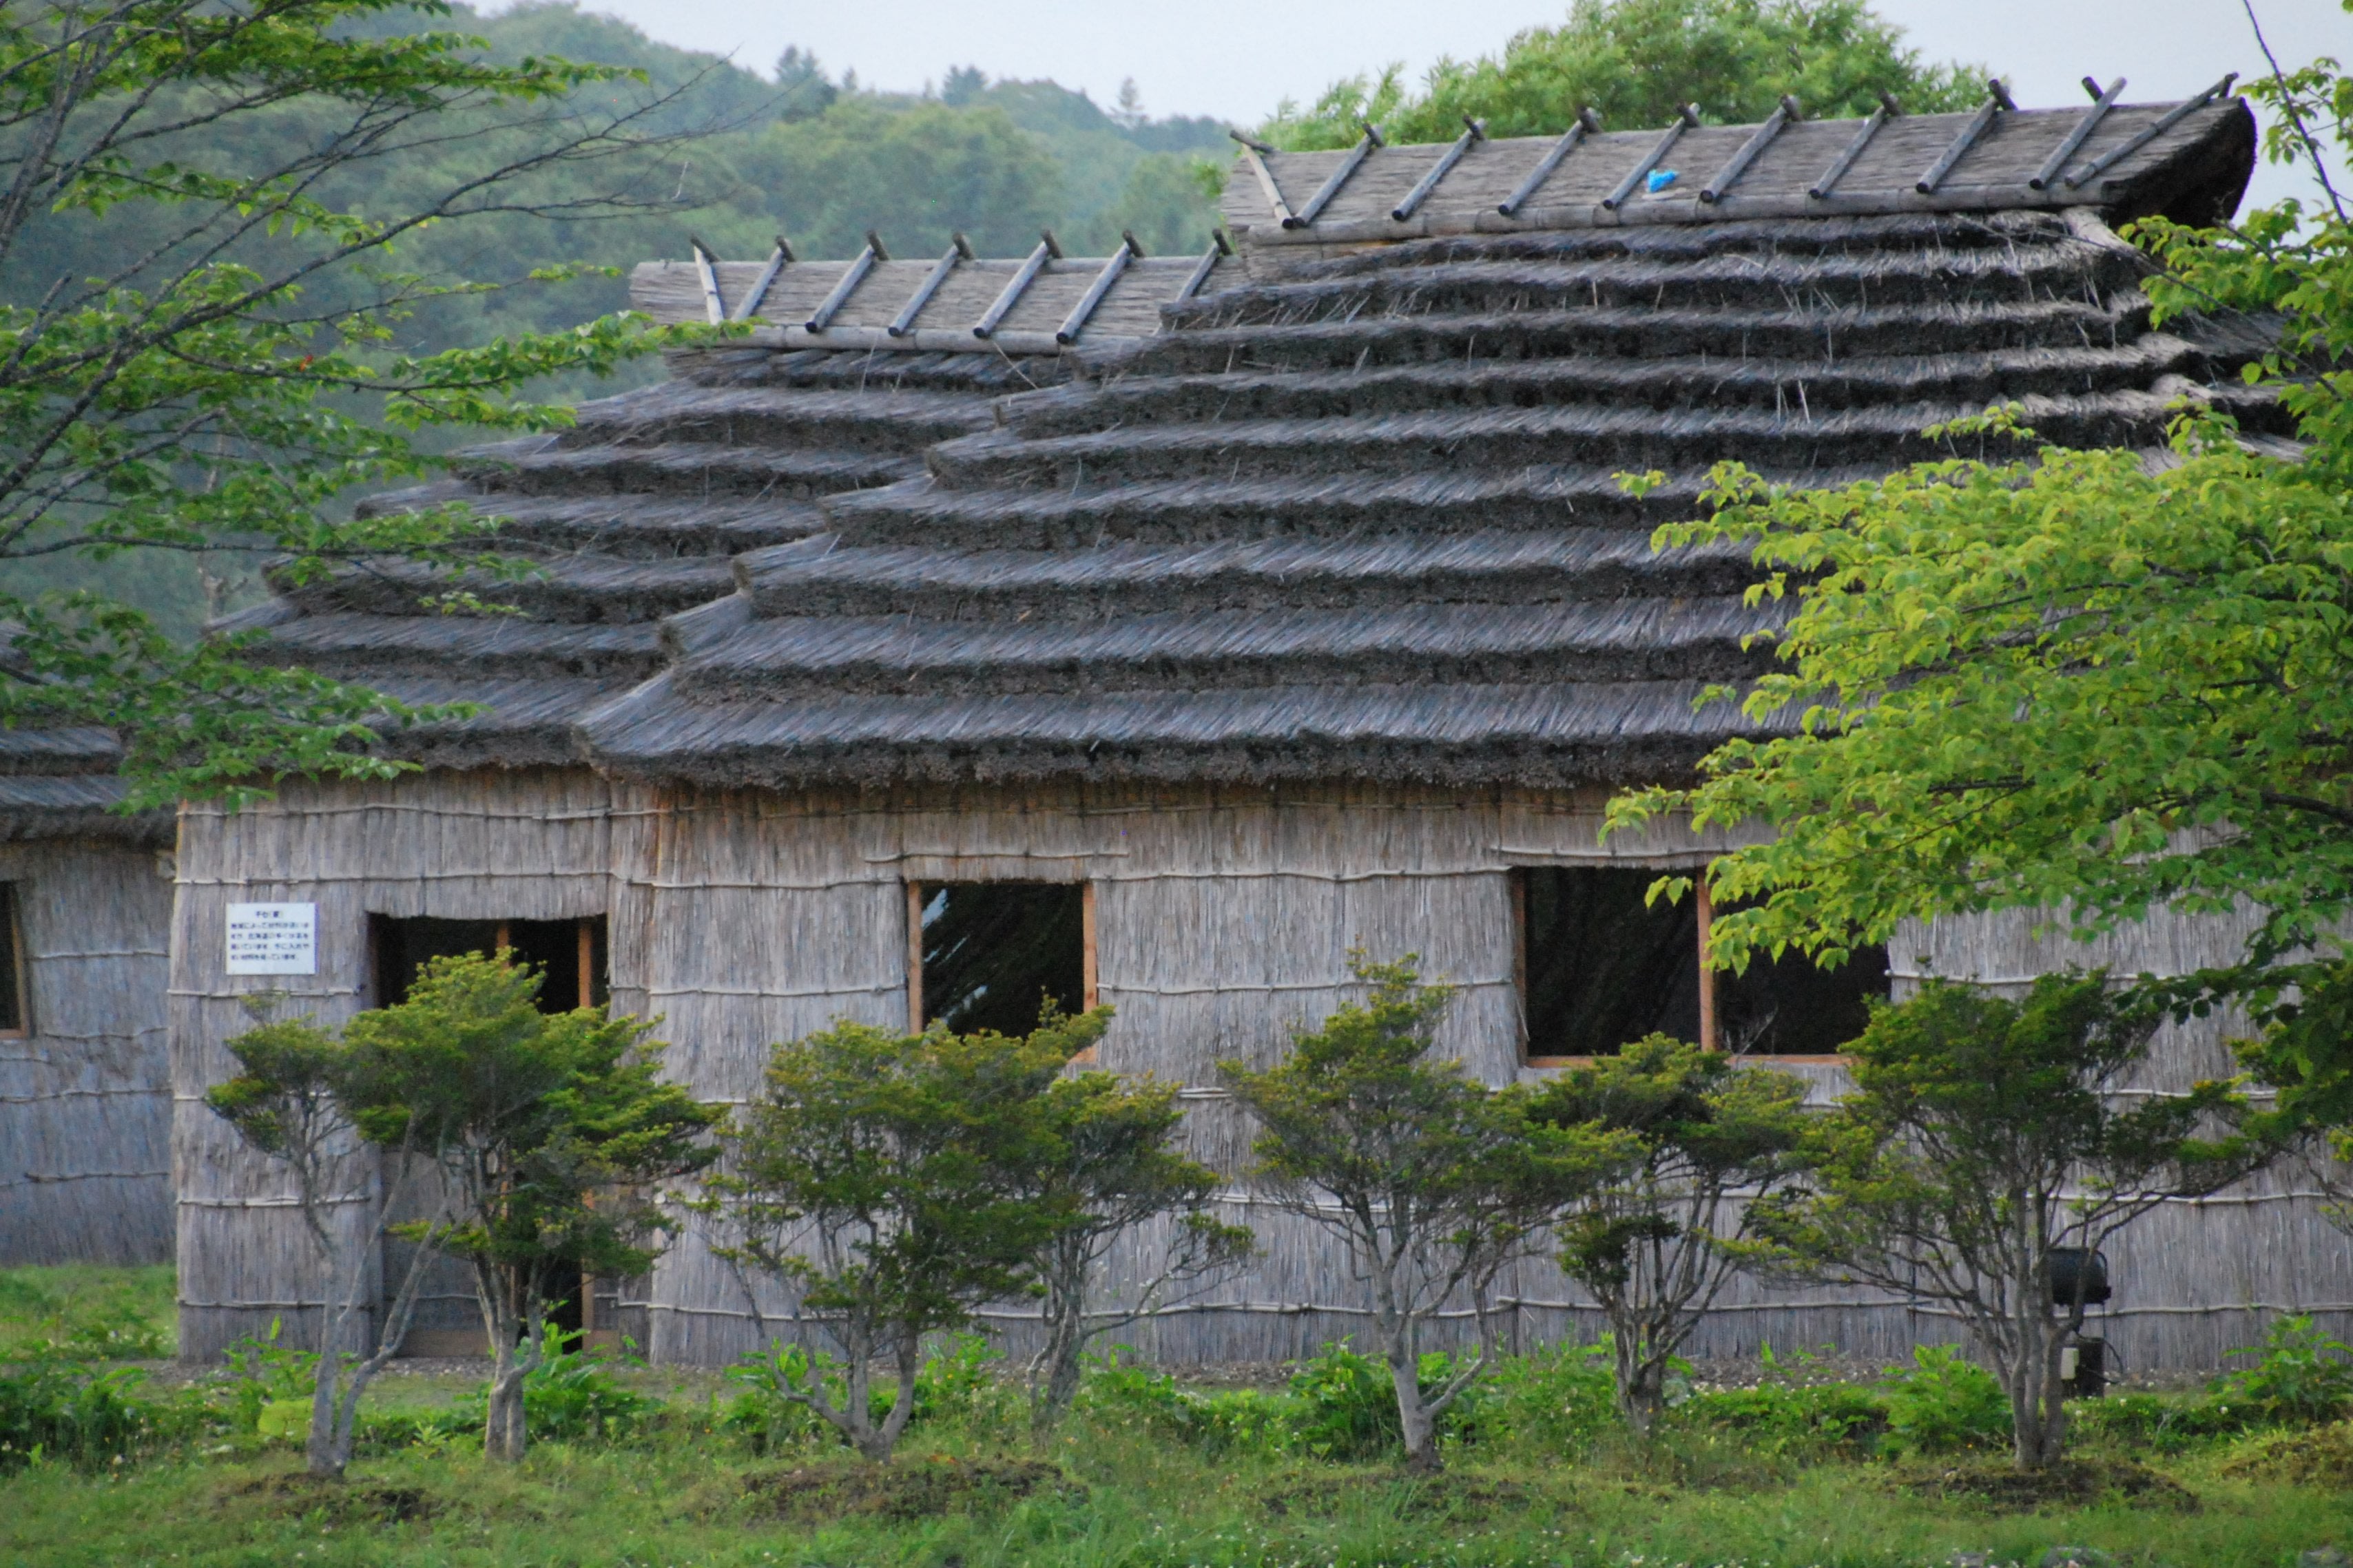 Traditional Ainu lodgings at Upopoy National Ainu Museum. The walls are made of reeds and the rooftops are thatched.